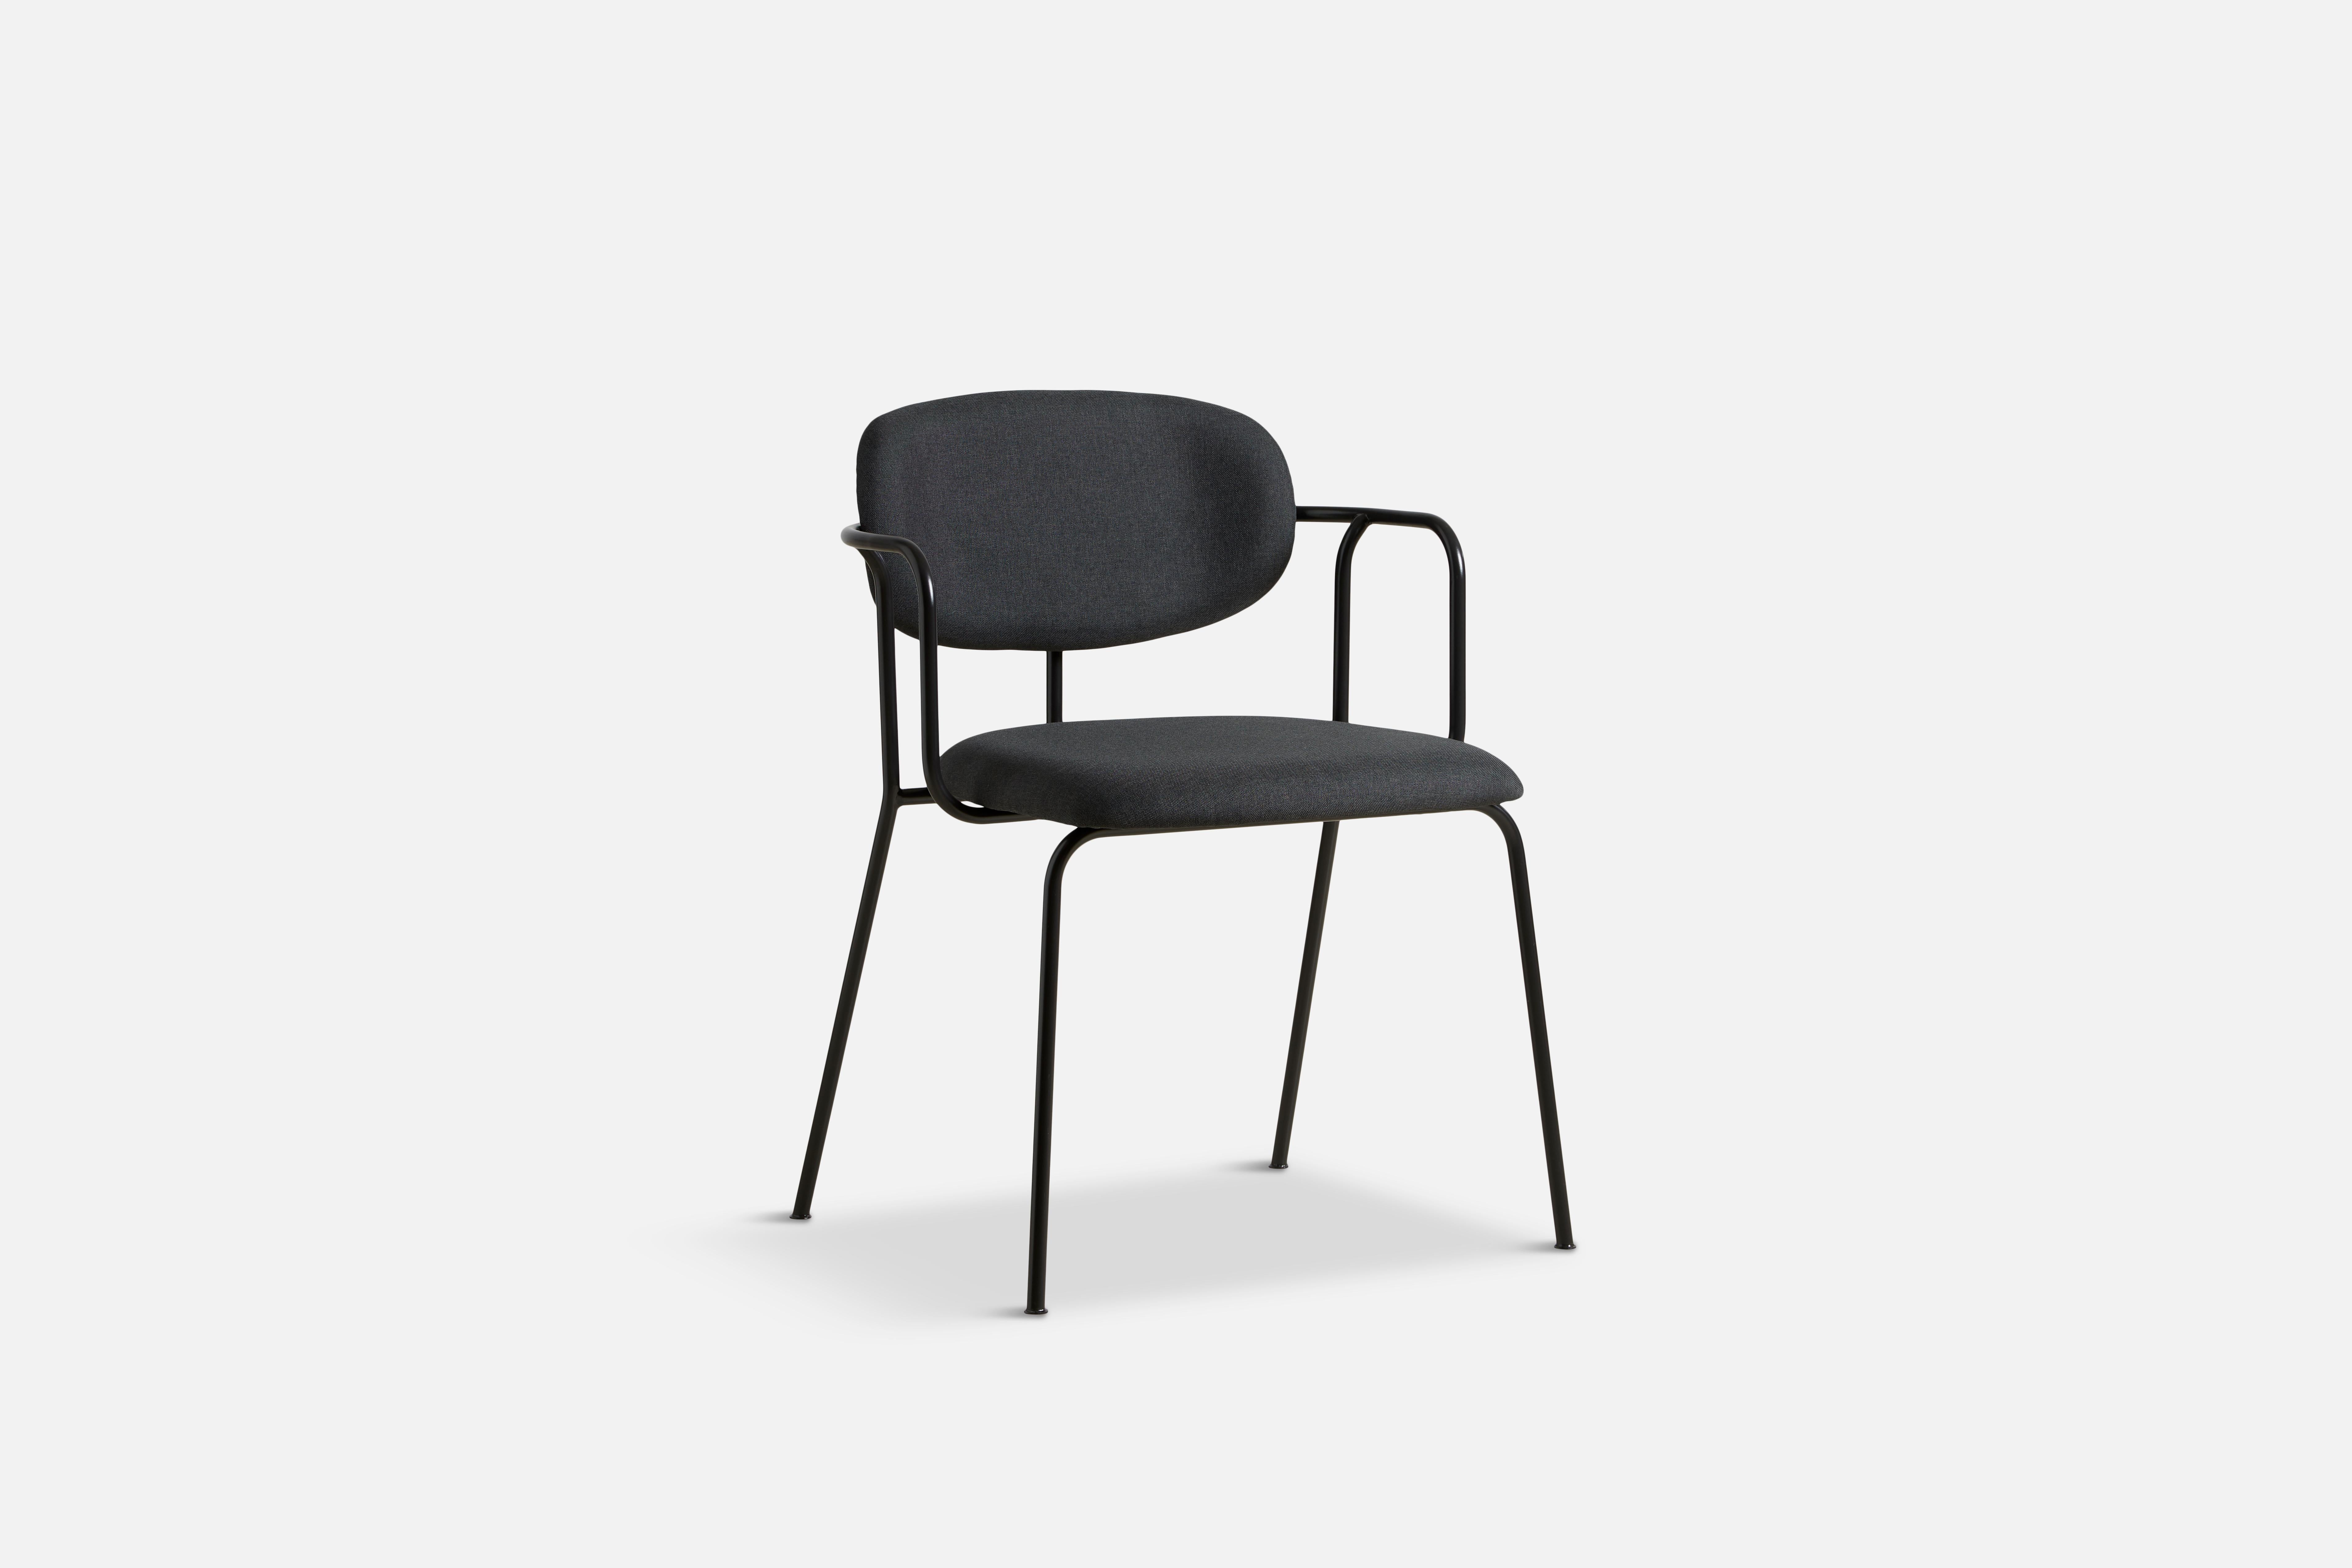 Frame dark dining chair by Mario Tsai Studio.
Materials: Fabric, metal.
Dimensions: D 53 x W 57 x H 77 cm.

The Frame dining chair arose from the idea of designing a chair like you construct a small building. Strongly inspired by the stringent